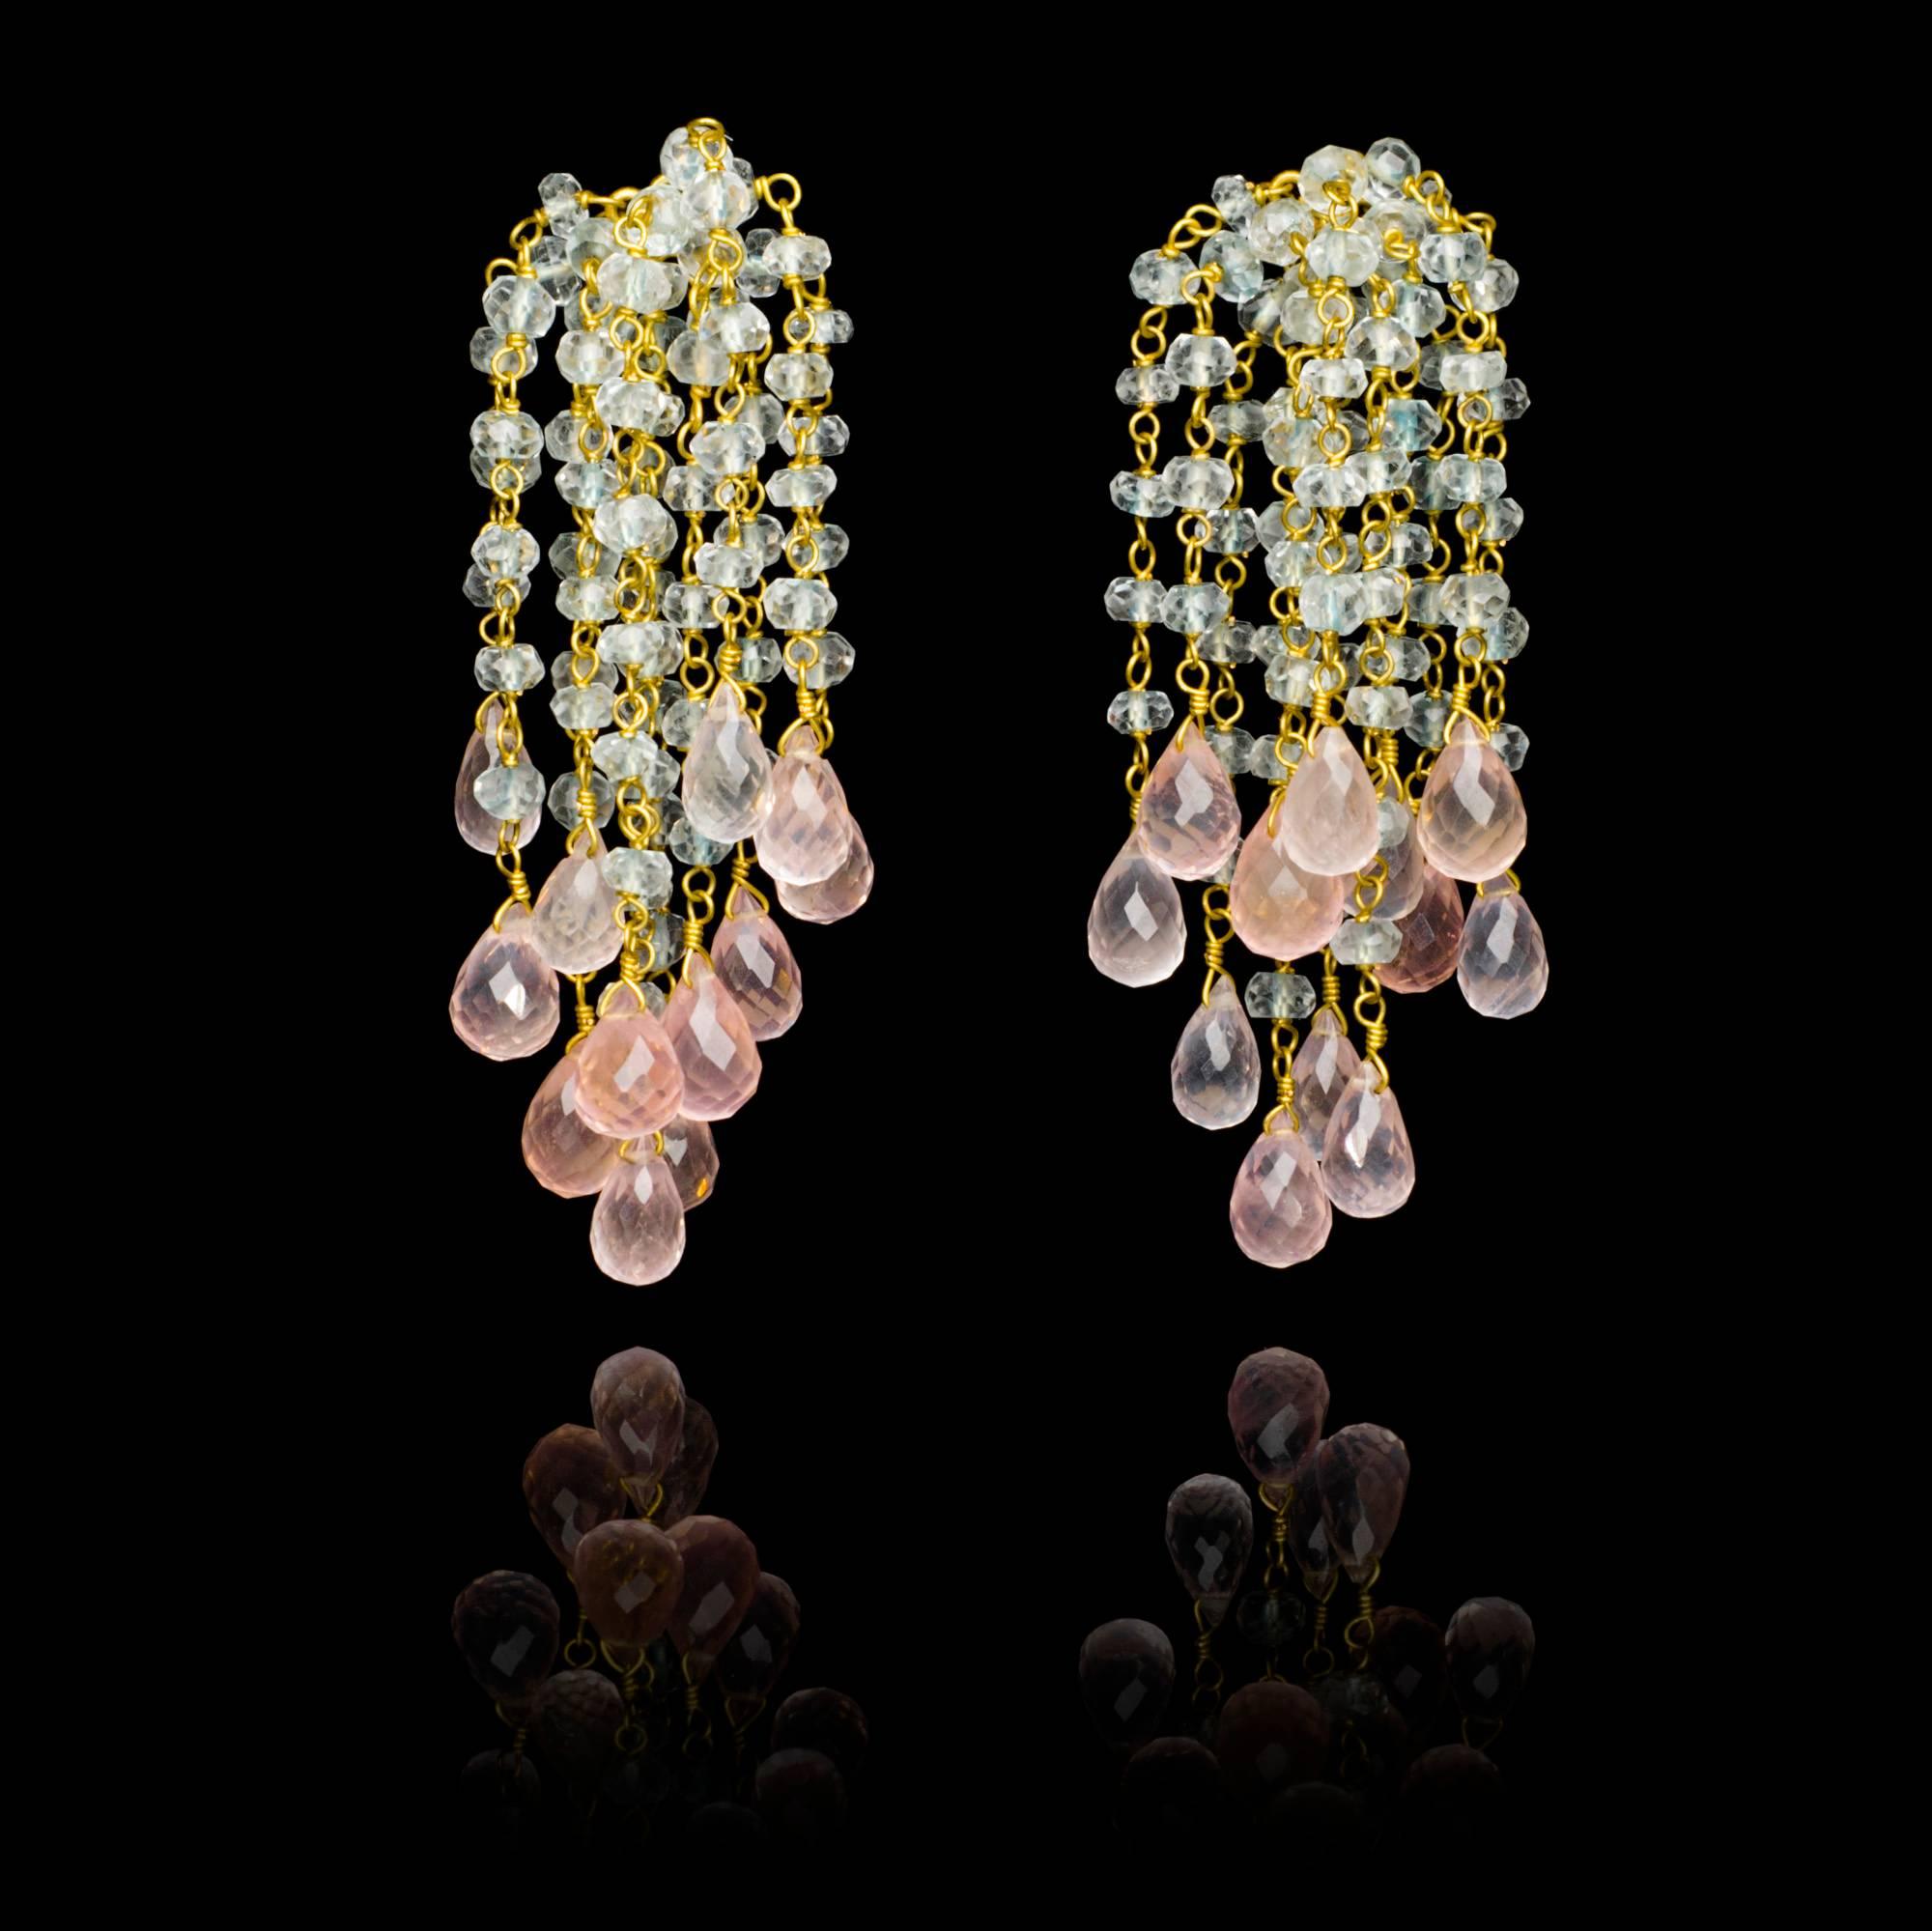 A pair of elegant and playful hand crafted 18 karat gold Waterfall Earrings with light blue faceted aquamarine beads that look gorgeous next to the delicate pink of the rose quartz briolettes. These earrings would look just as good with a pair of